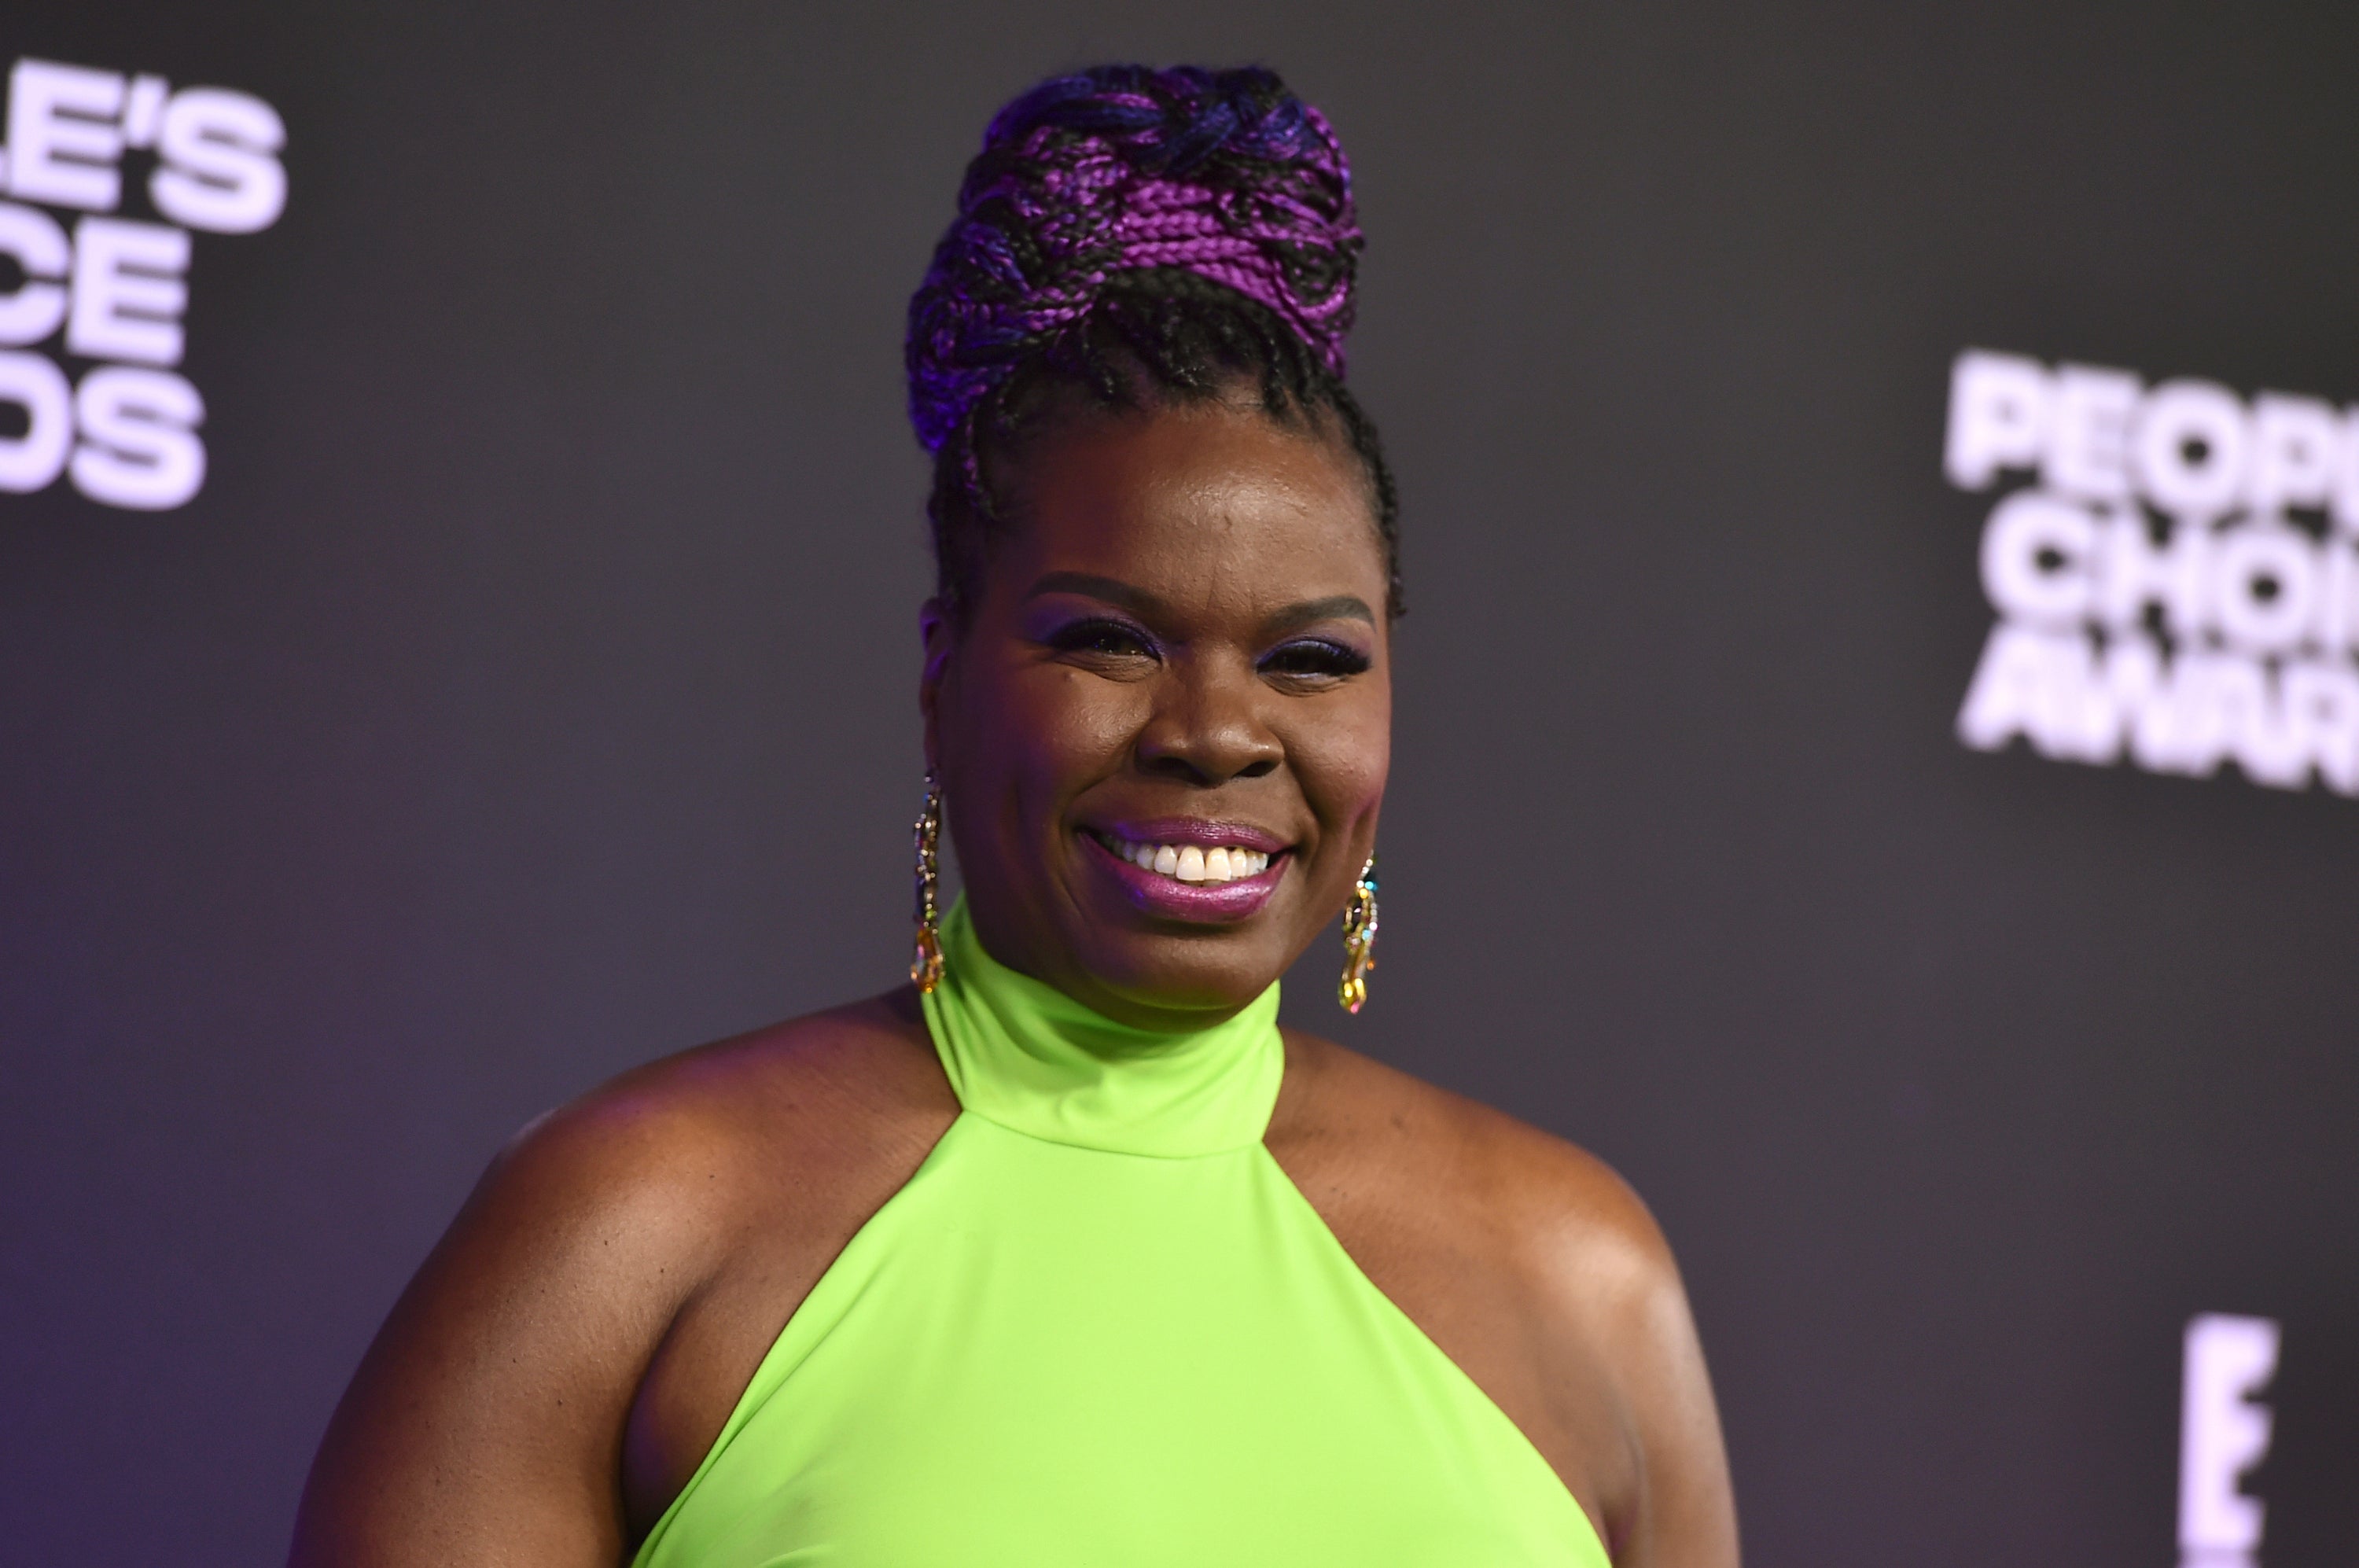 File image: Leslie Jones, who has been live-tweeting Olympics since 2016 says it could be her last time doing it